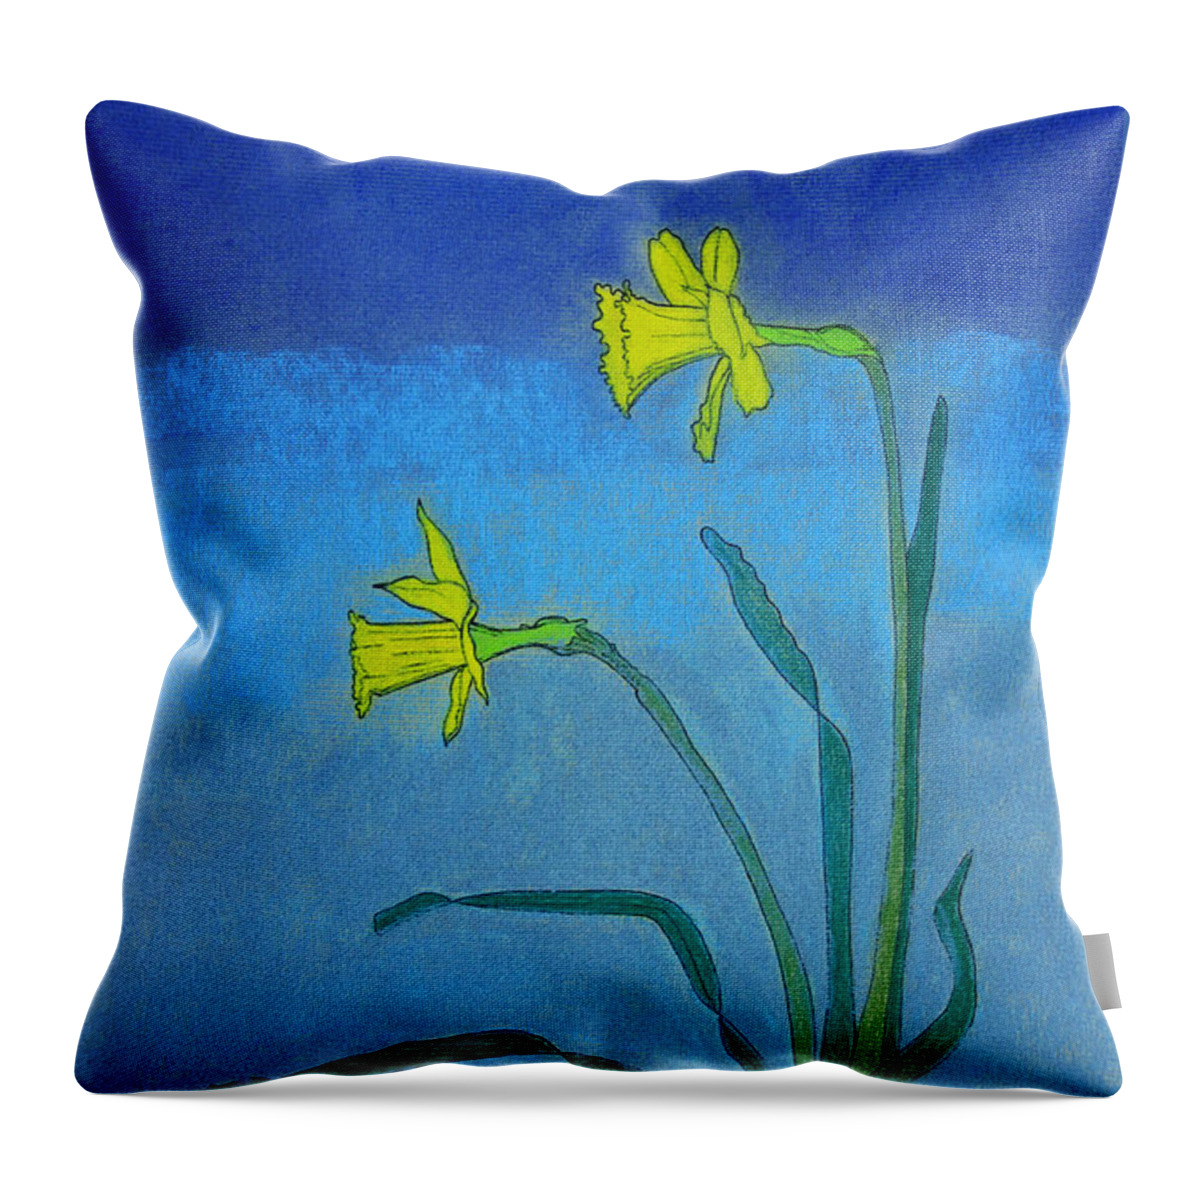 Flowers Throw Pillow featuring the painting Garden Daffodils by Norma Appleton